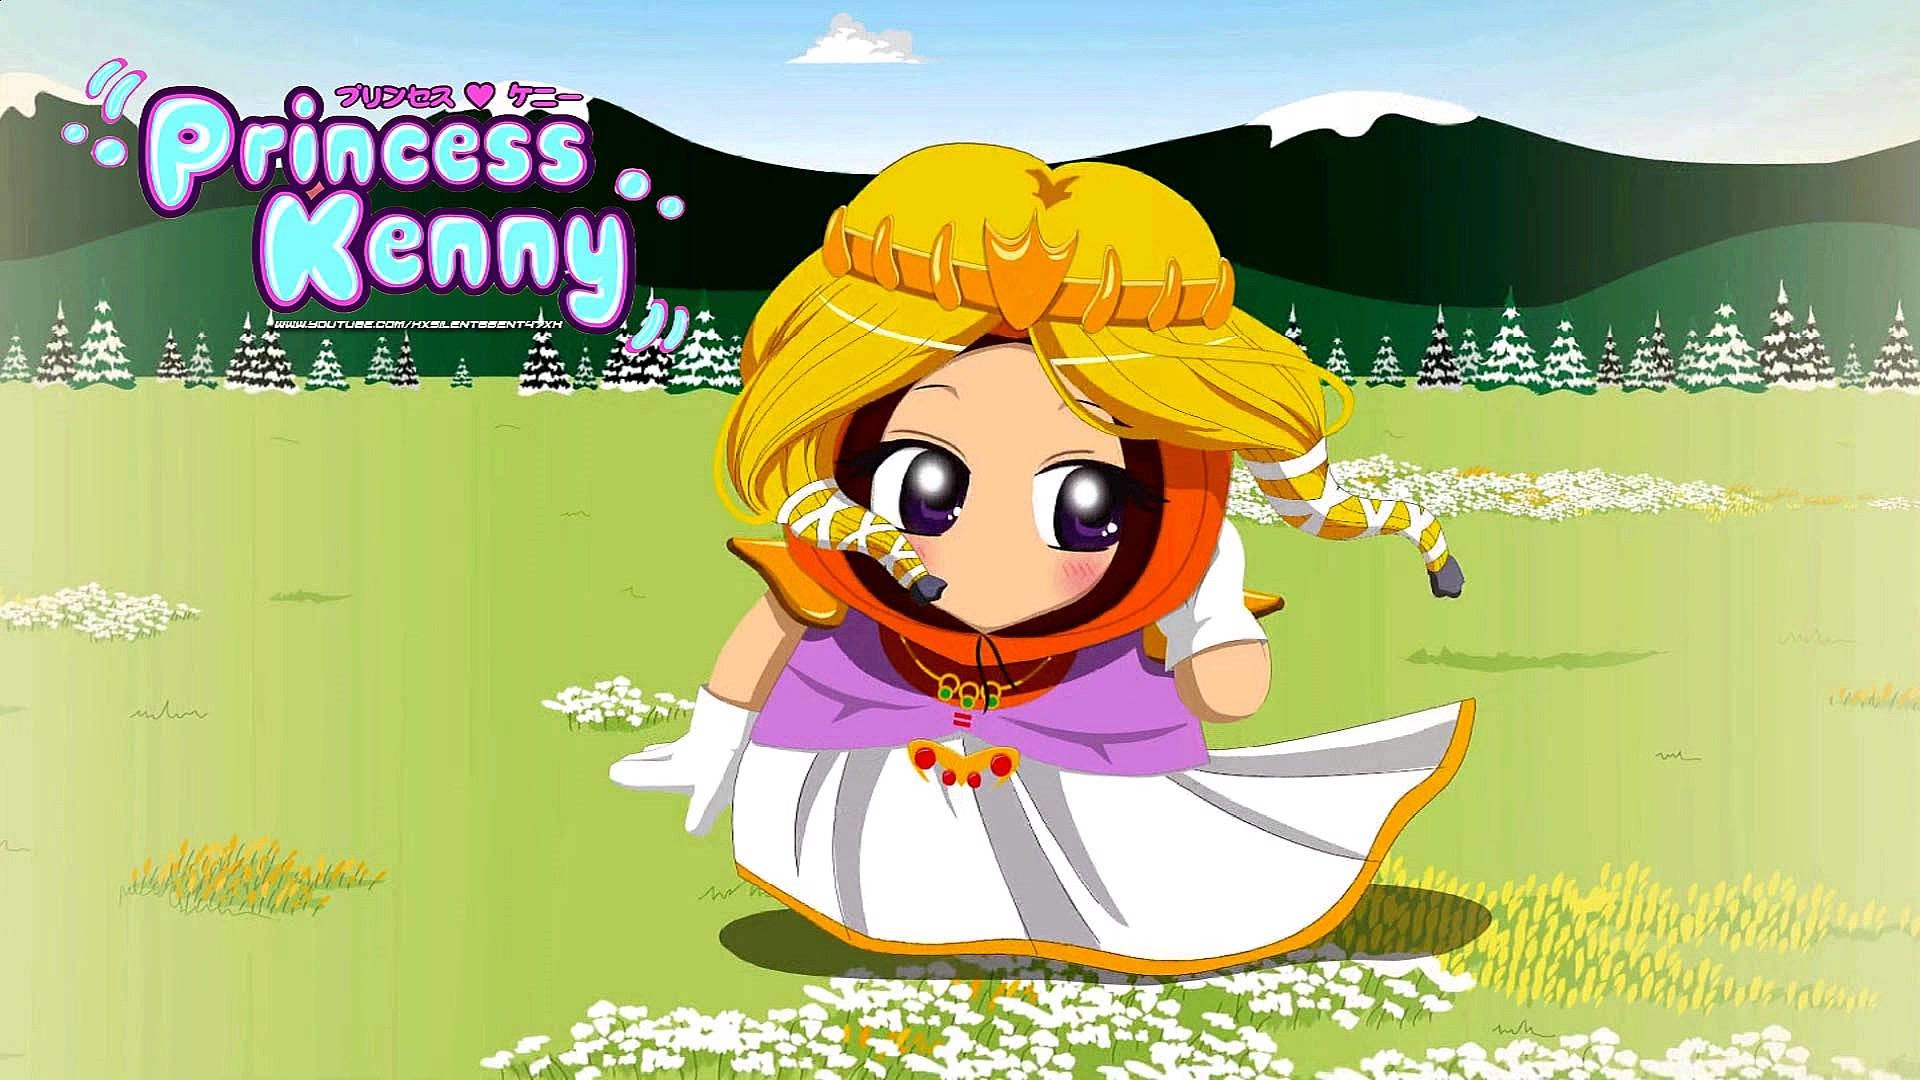 1920x1080 South Park: The Stick of Truth - Princess Kenny Theme Music/Song (Original)  - YouTube